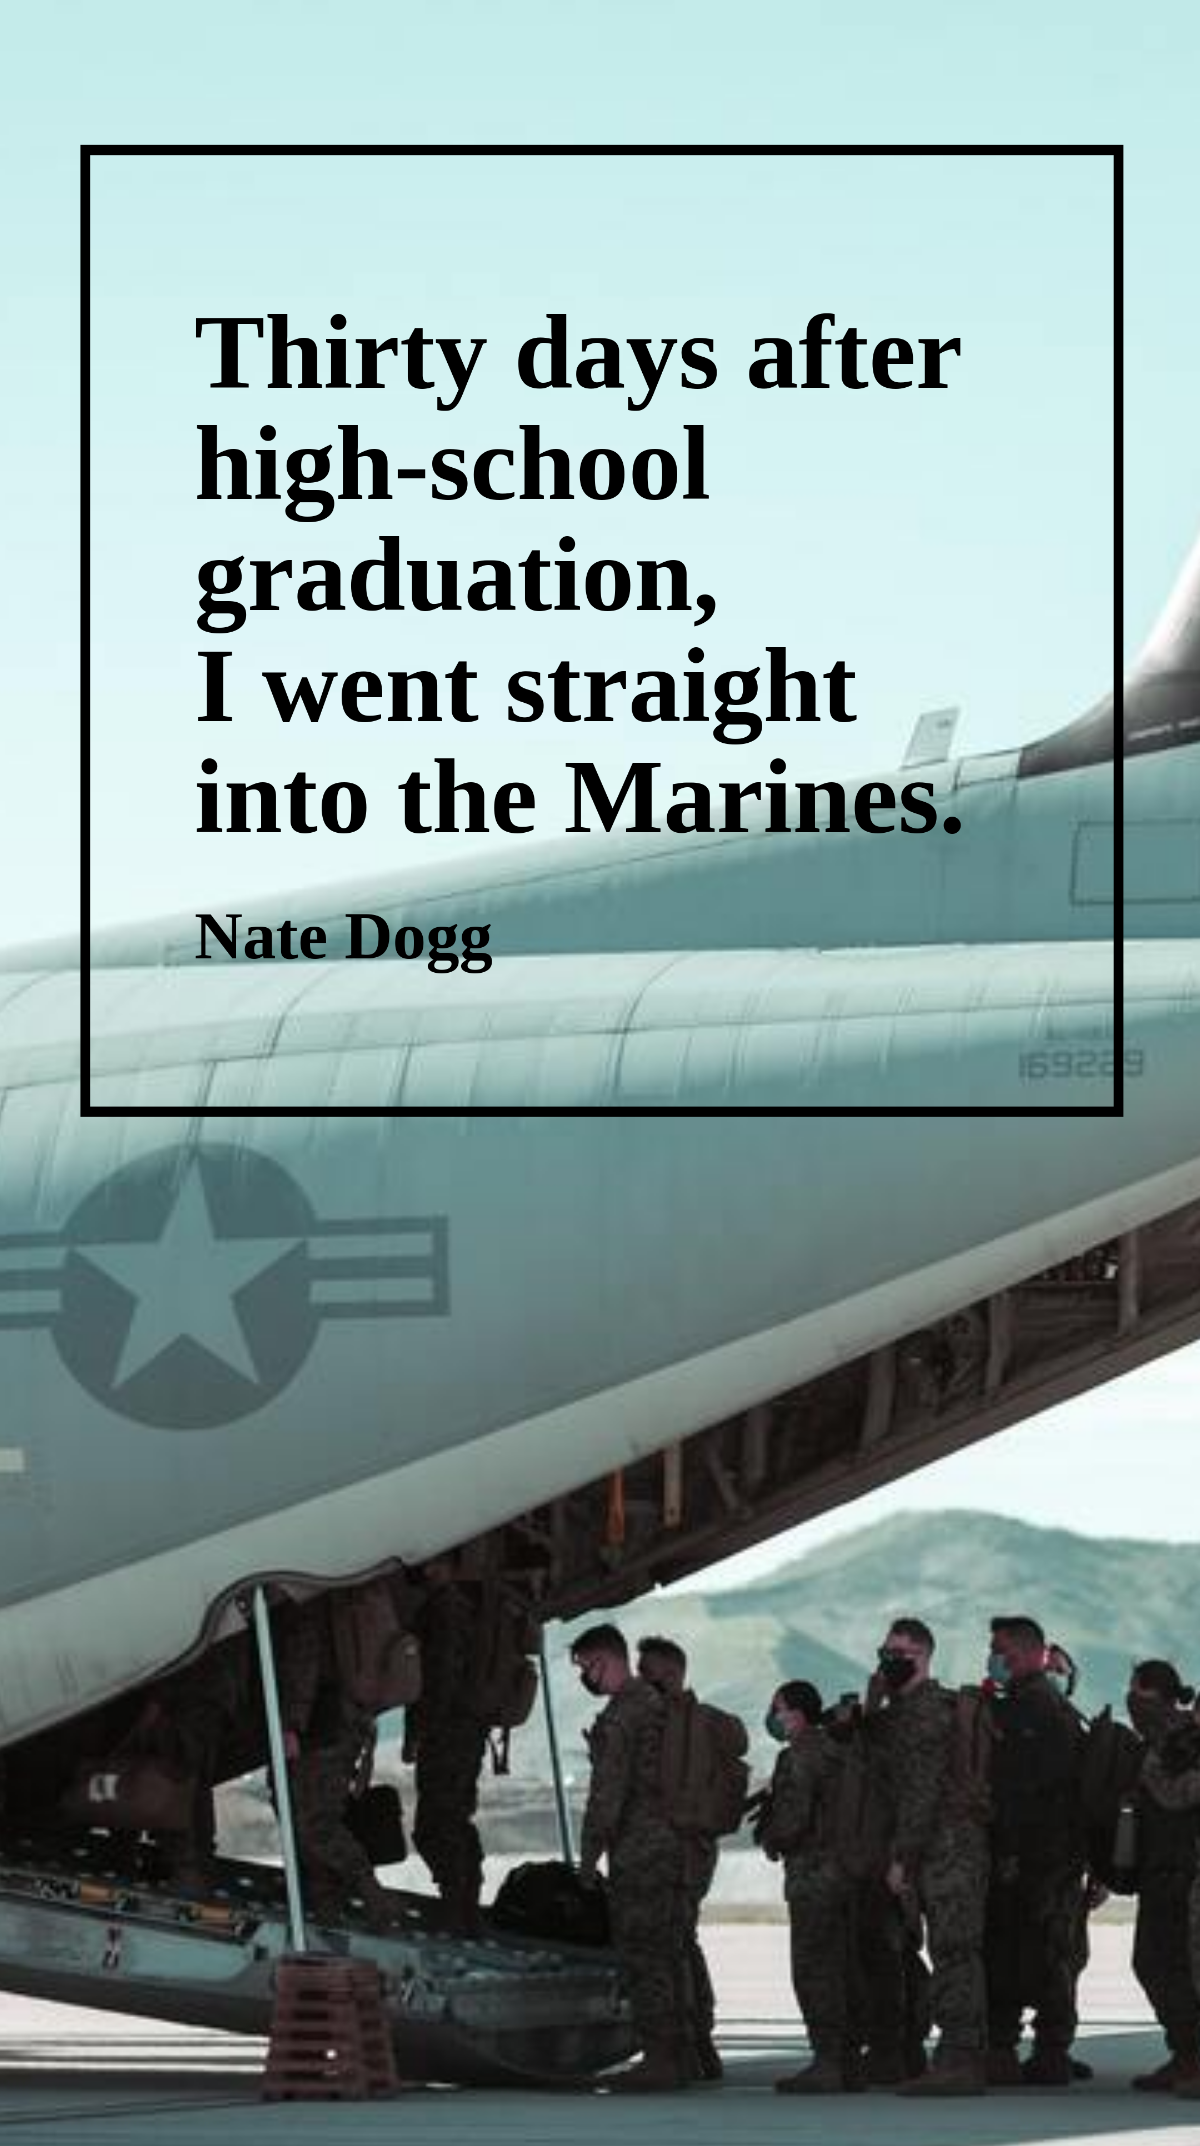 Free Nate Dogg - Thirty days after high-school graduation, I went straight into the Marines. Template